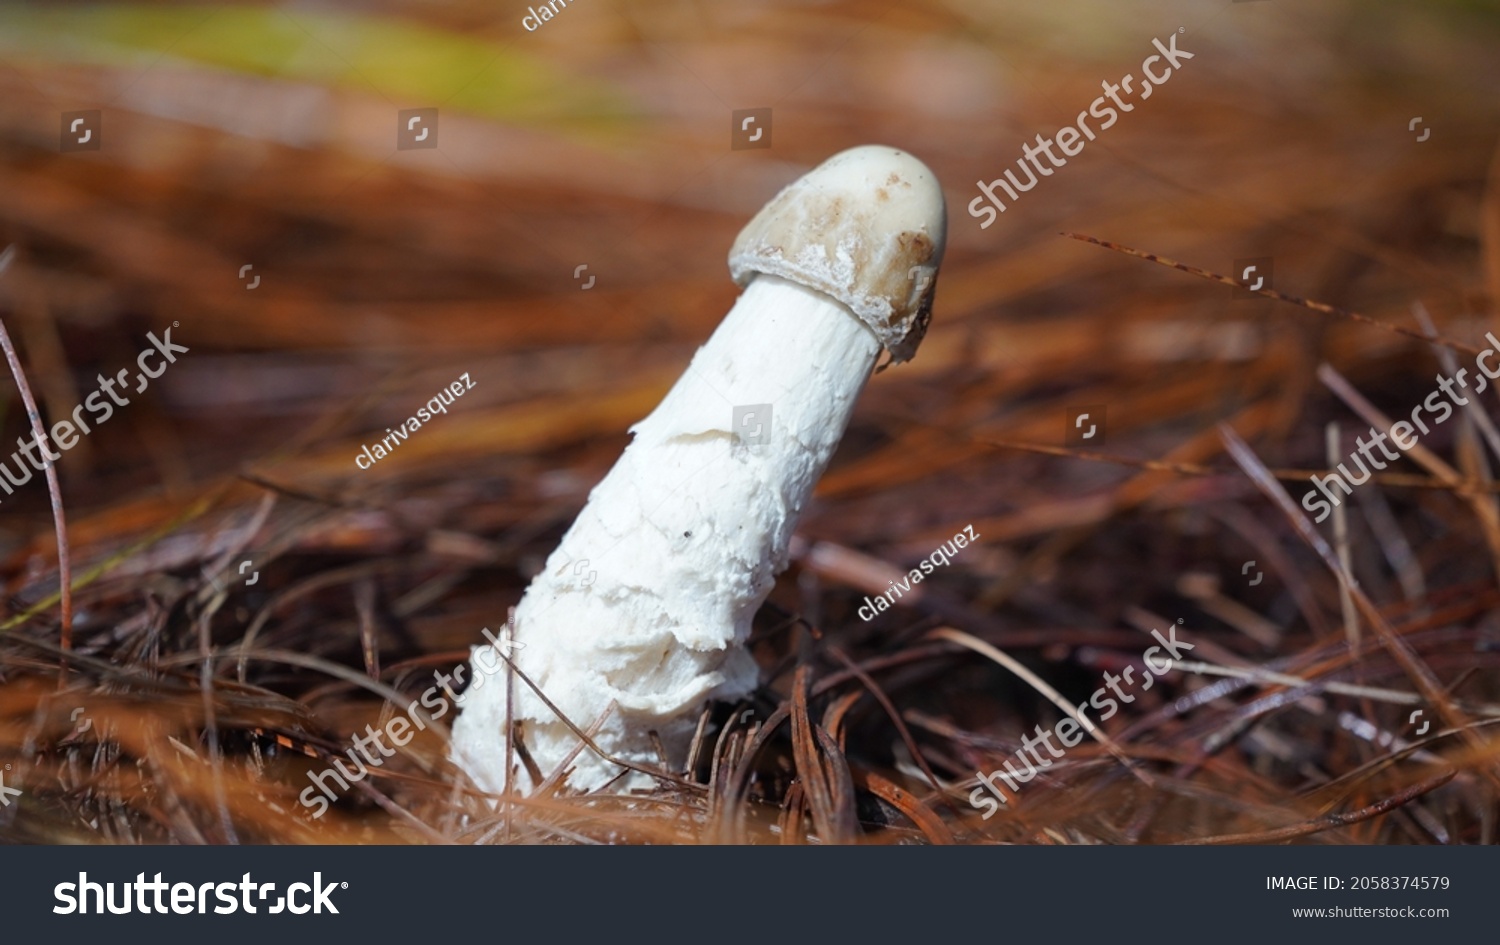 Why are dicks shapped like mushrooms